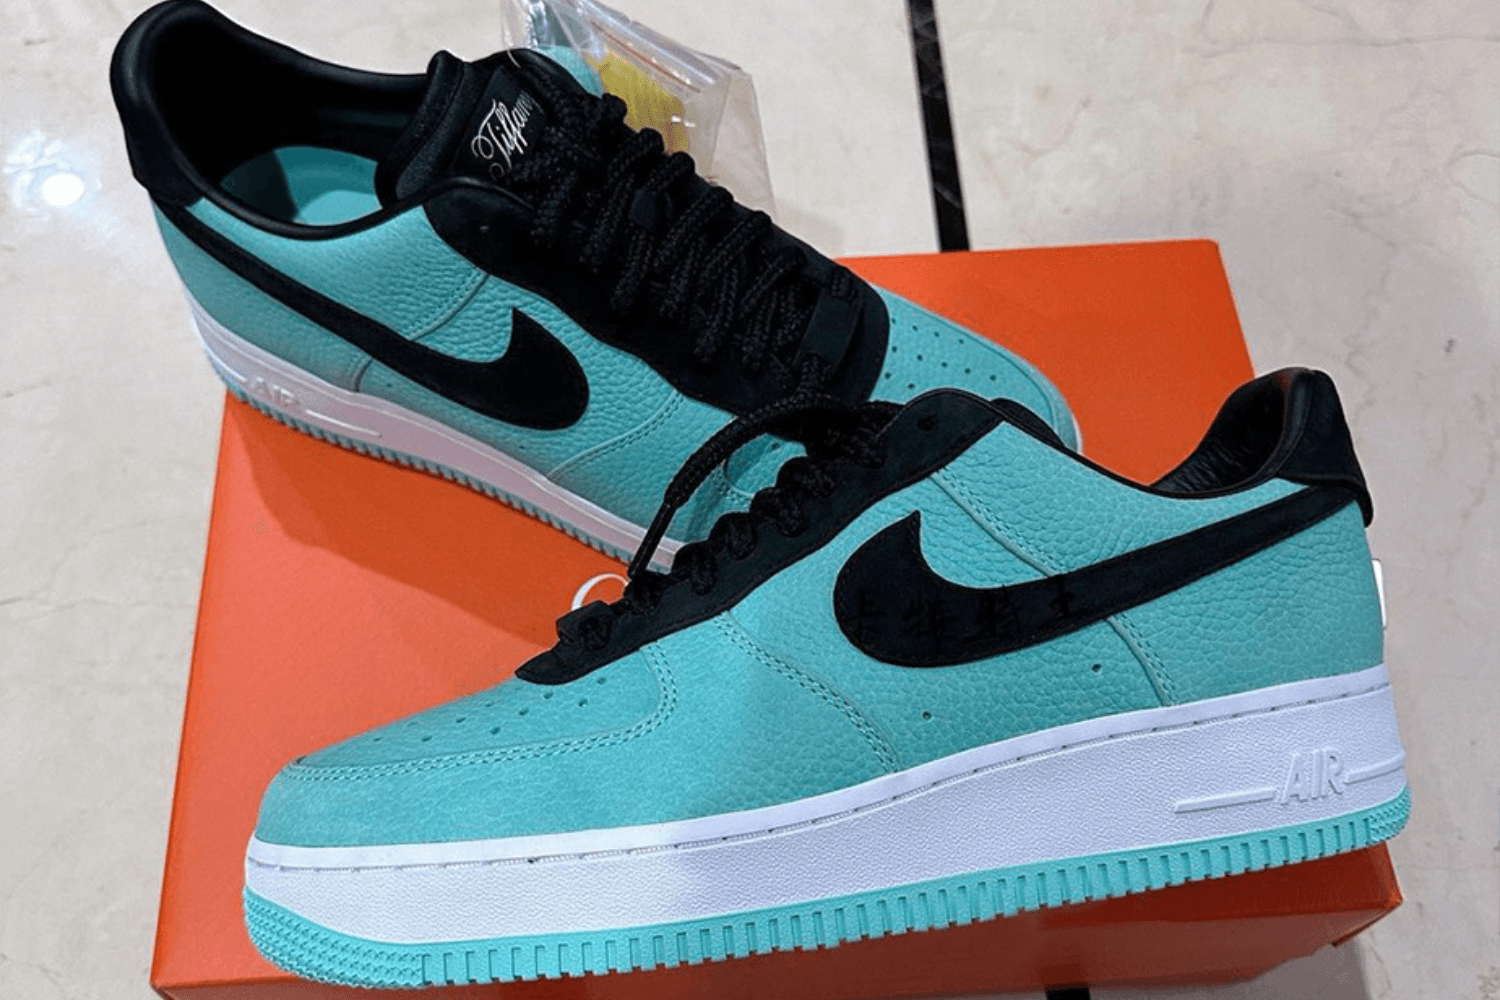 Tiffany & Co. x Nike Air Force 1 Low 1837 sample unveiled